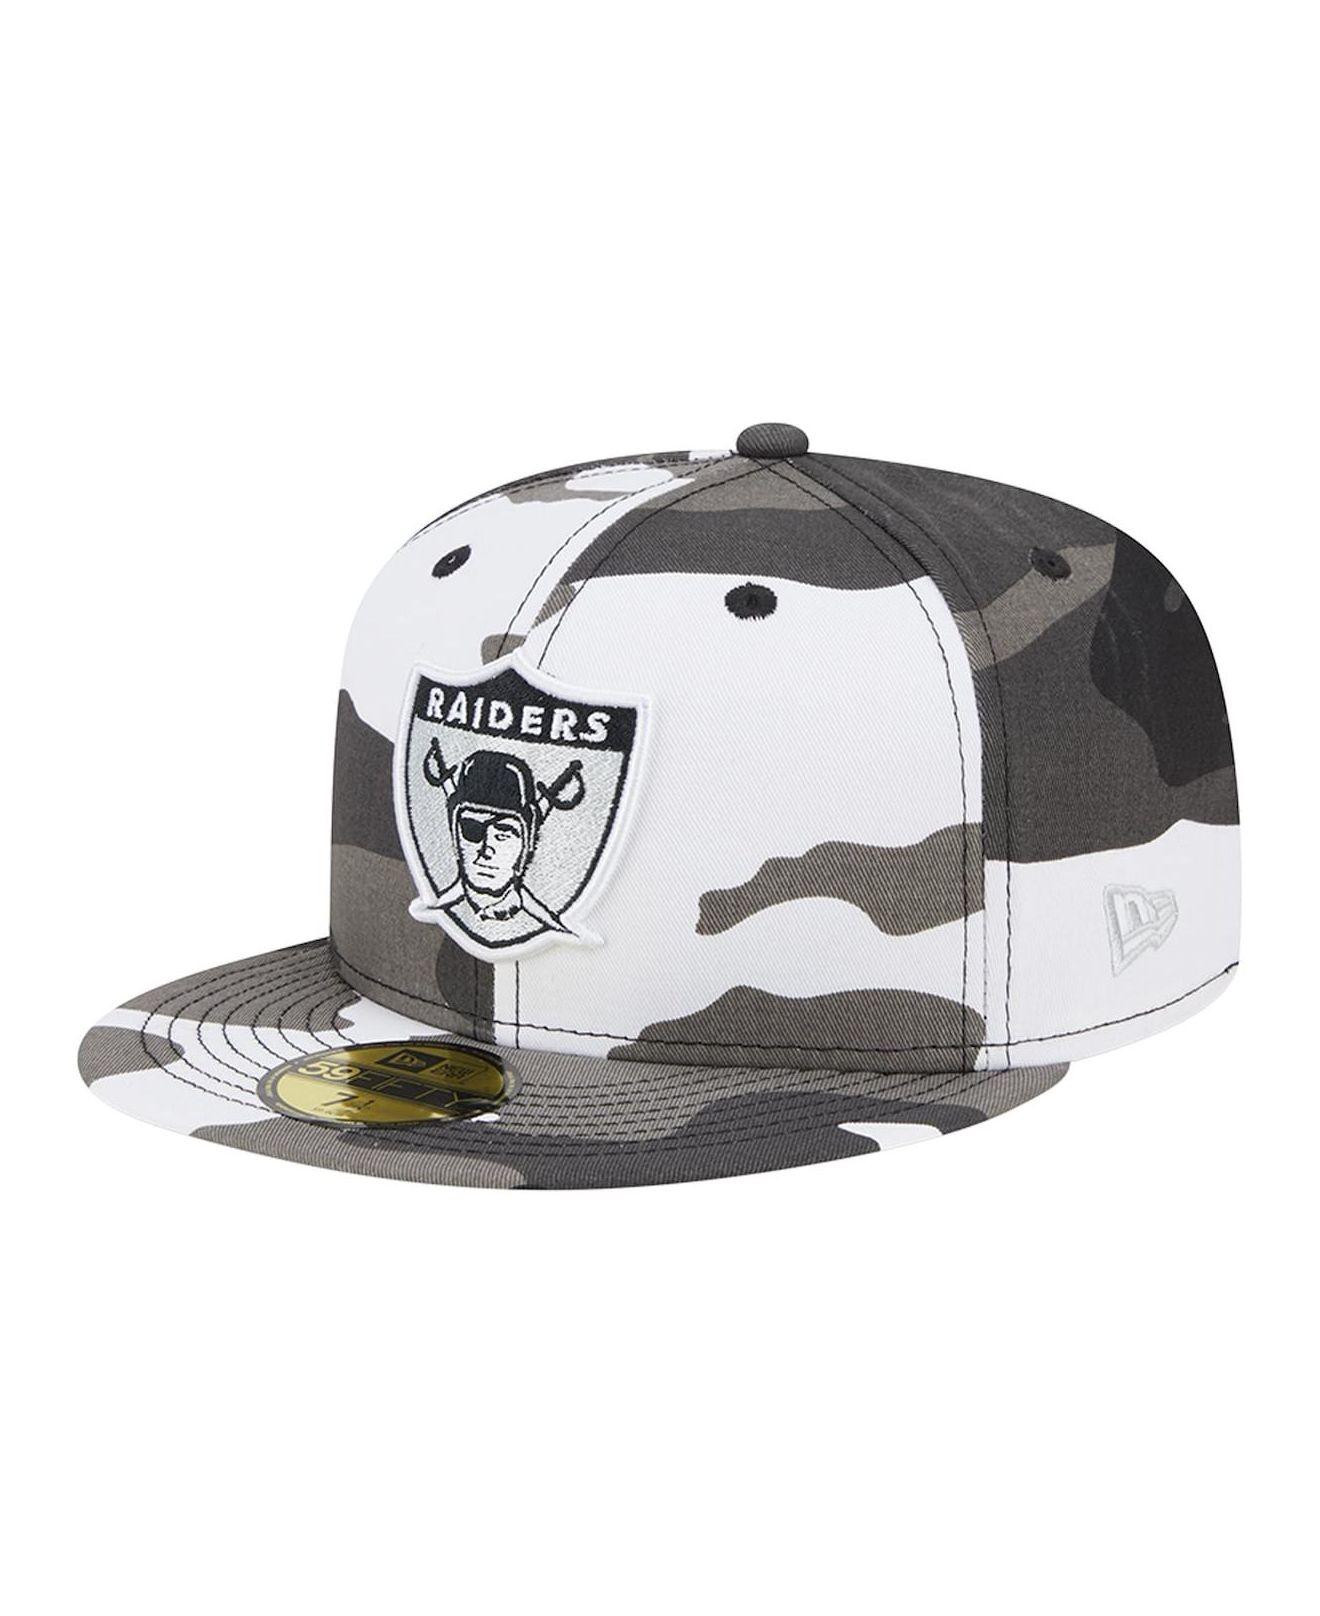 Lids Las Vegas Raiders New Era Historic Champs 59FIFTY Fitted Hat - Black